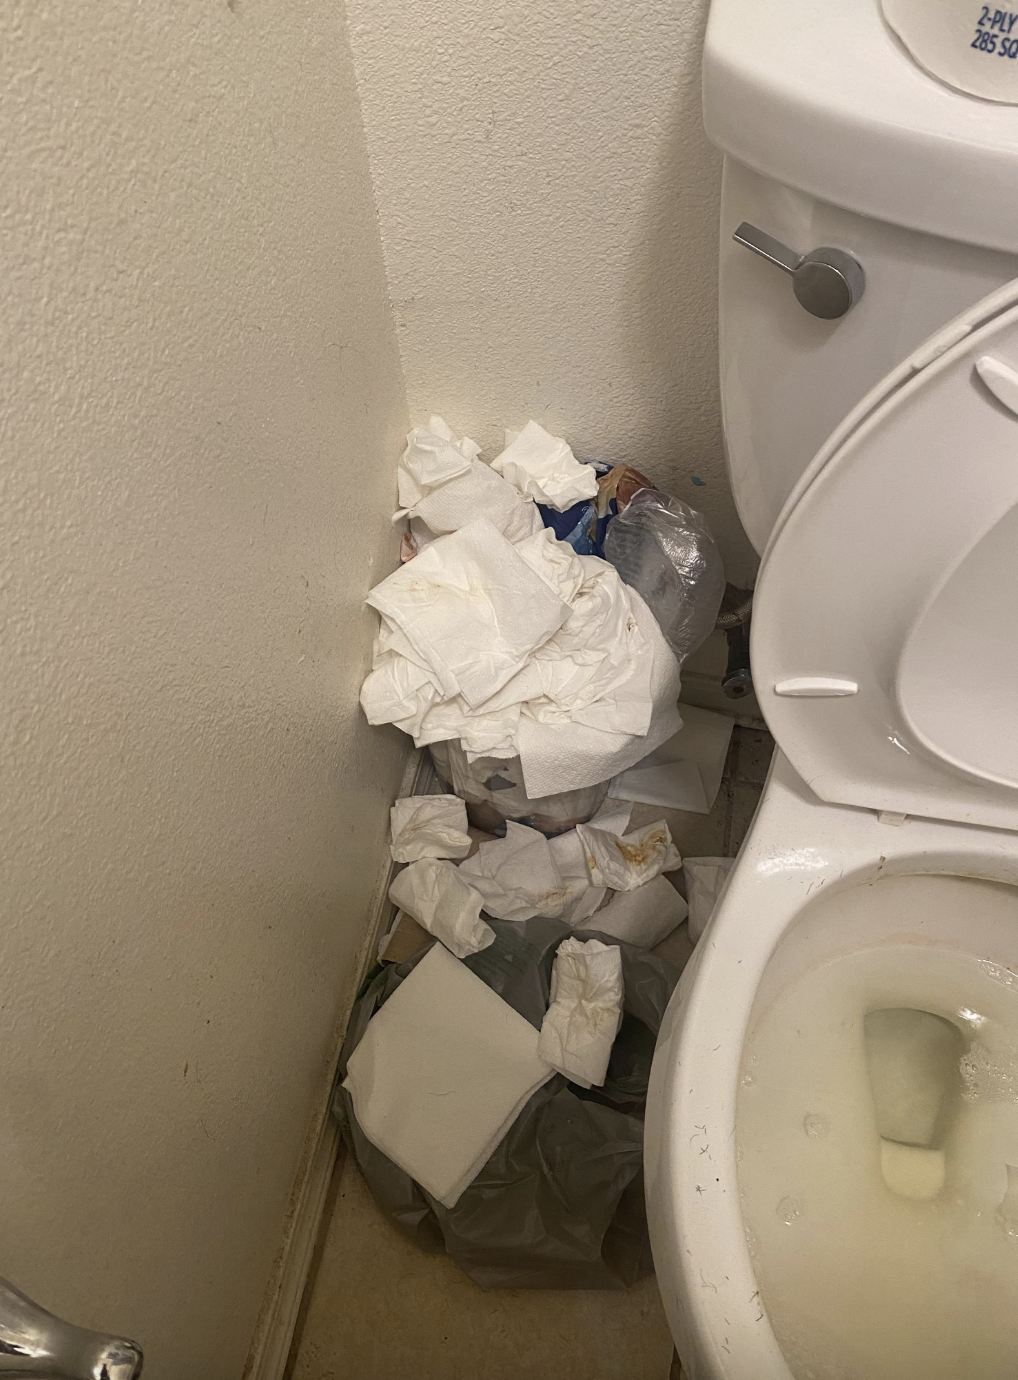 Overflowing trash can beside a toilet in a cluttered bathroom